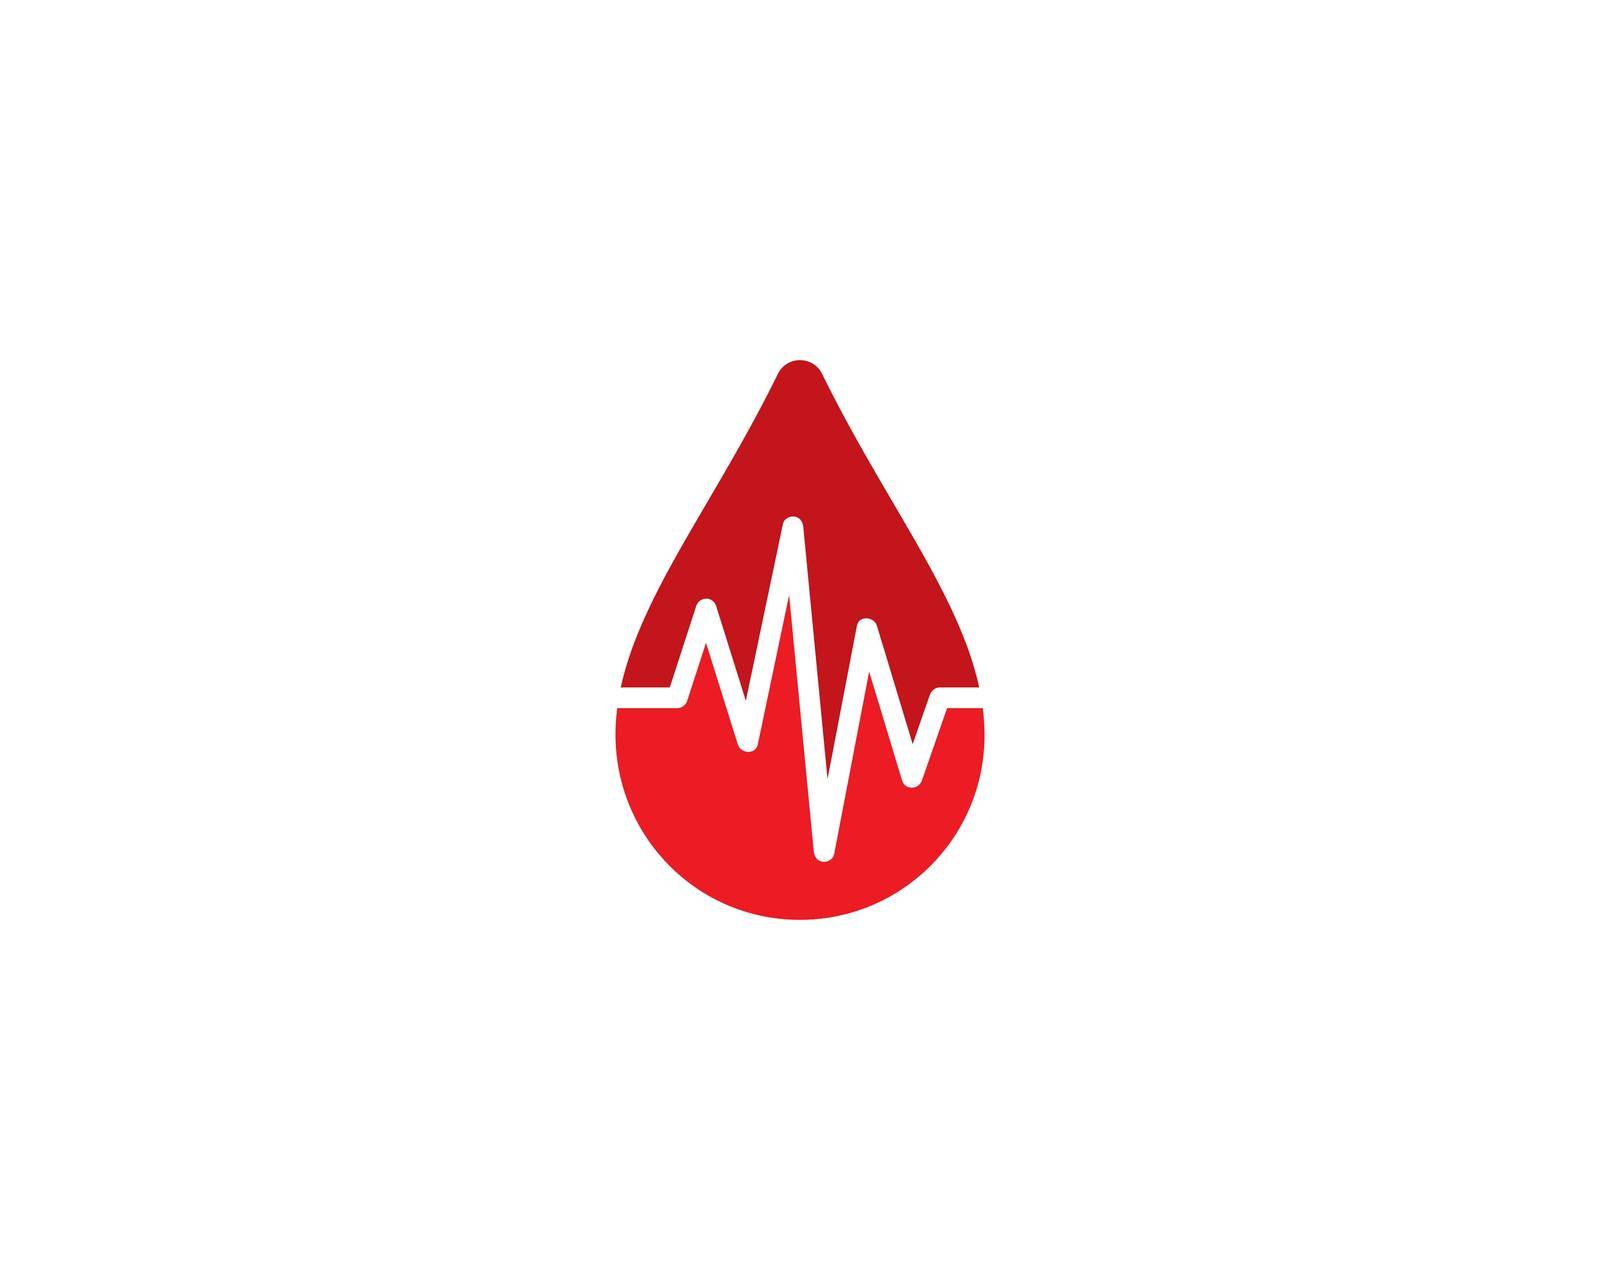 Blood logo template by Attades19